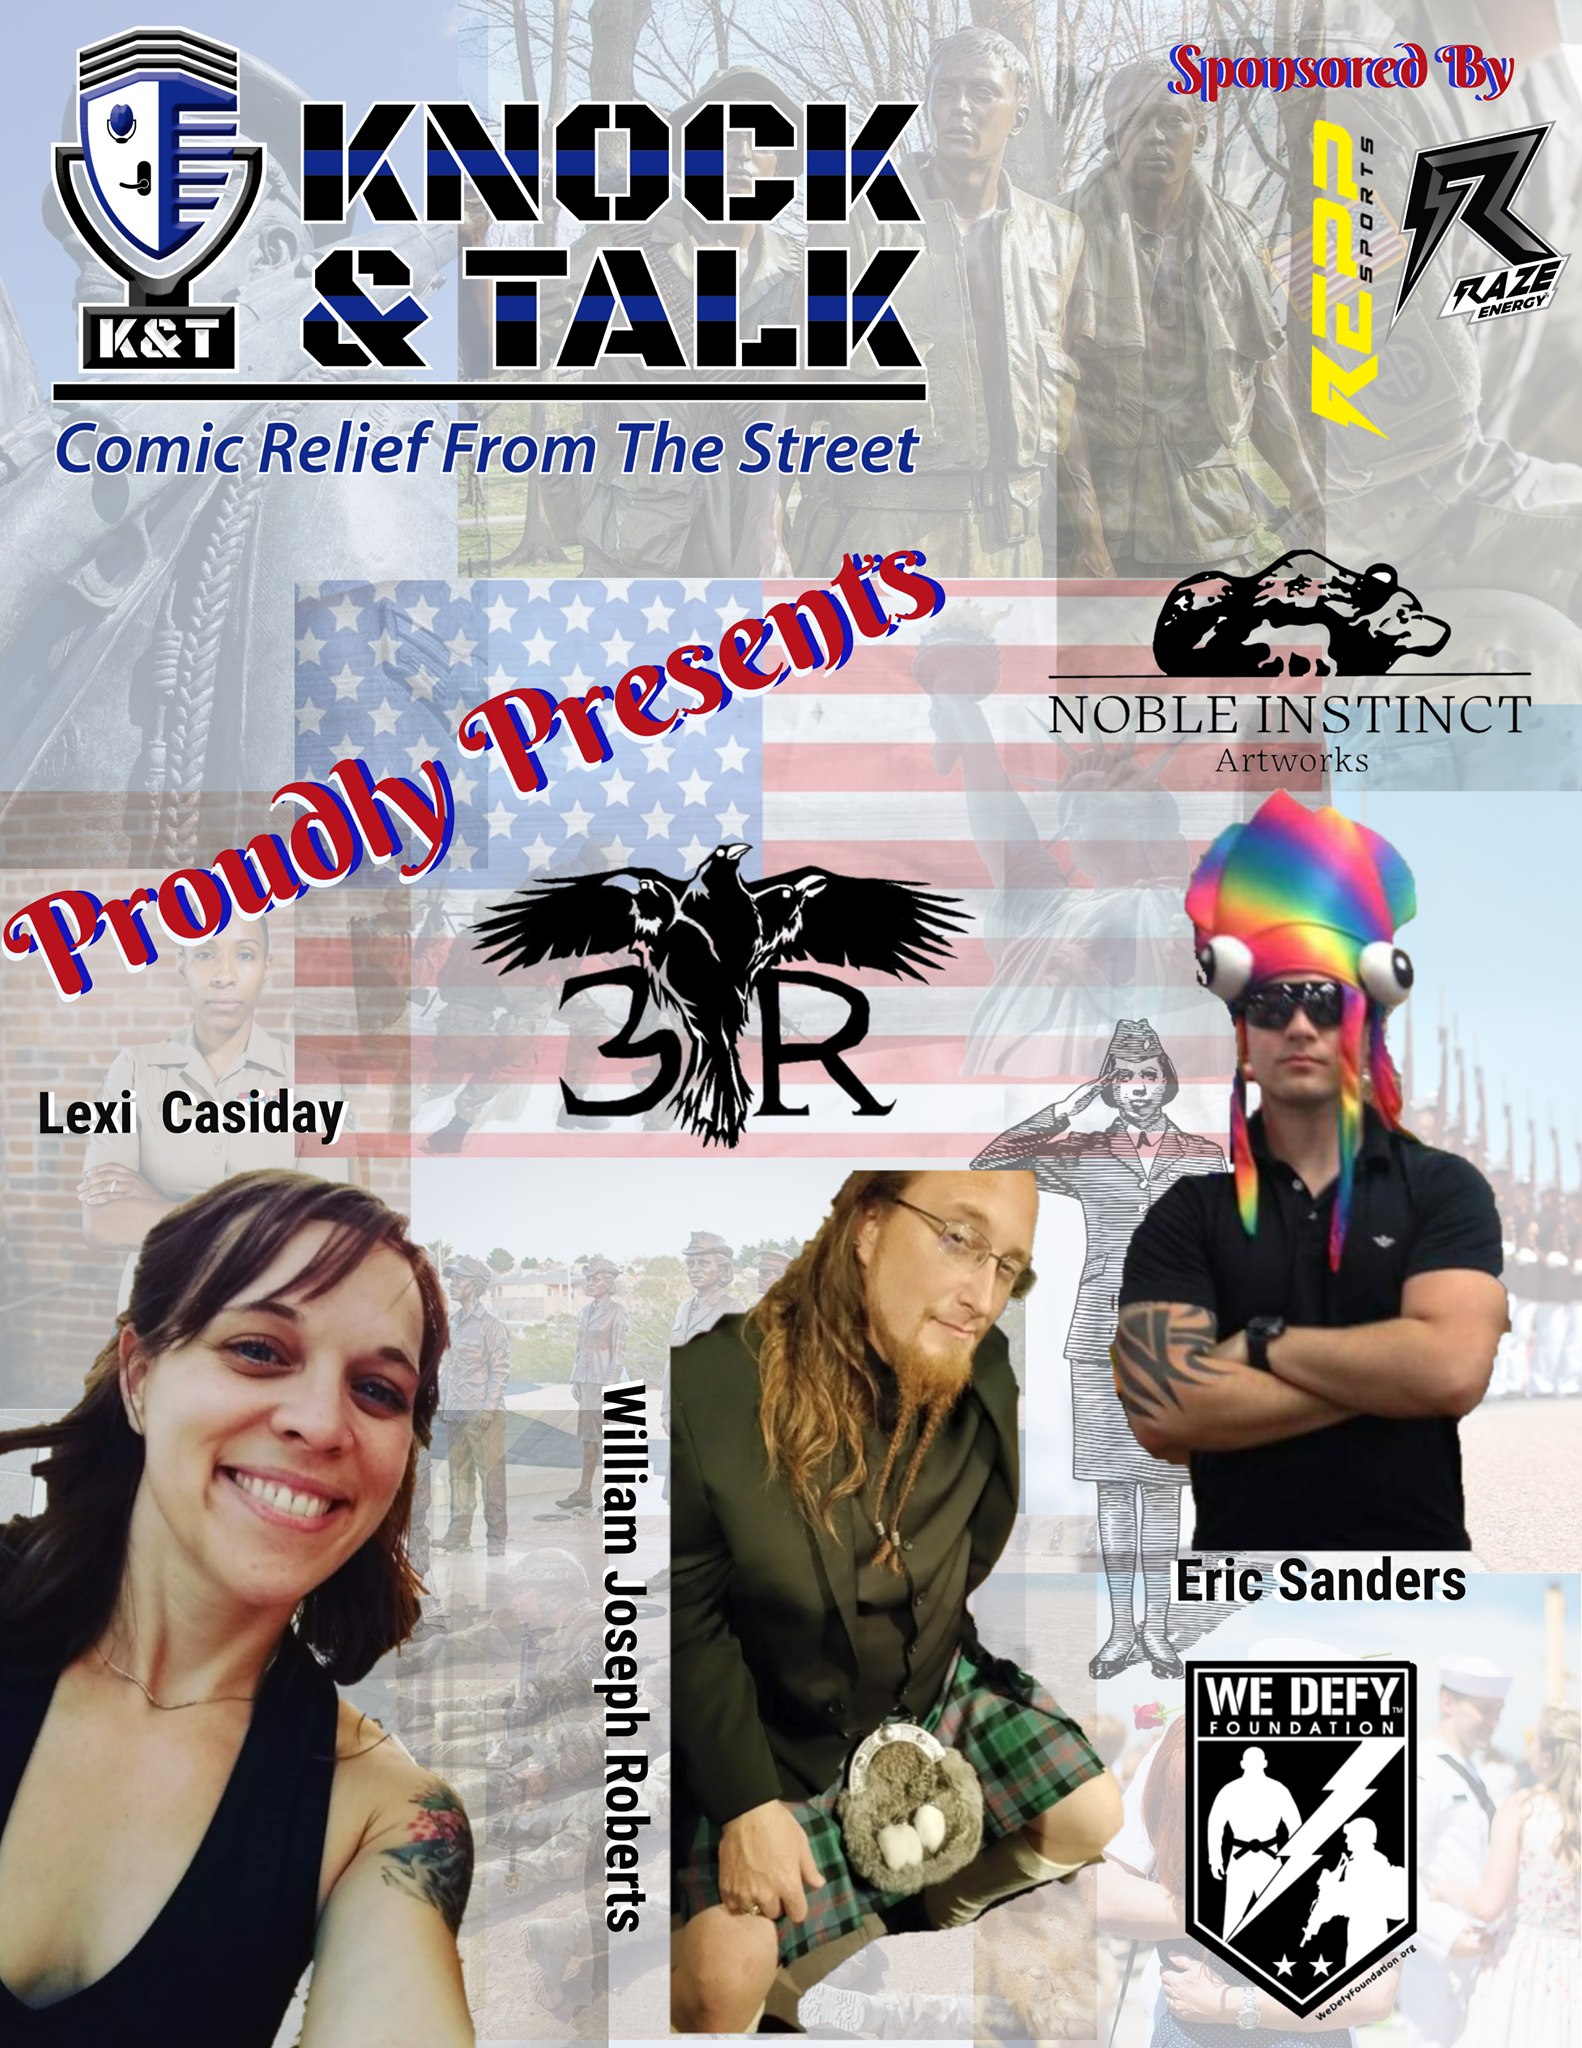 Knock & Talk podcast Episode 007, “Your call is important to us”